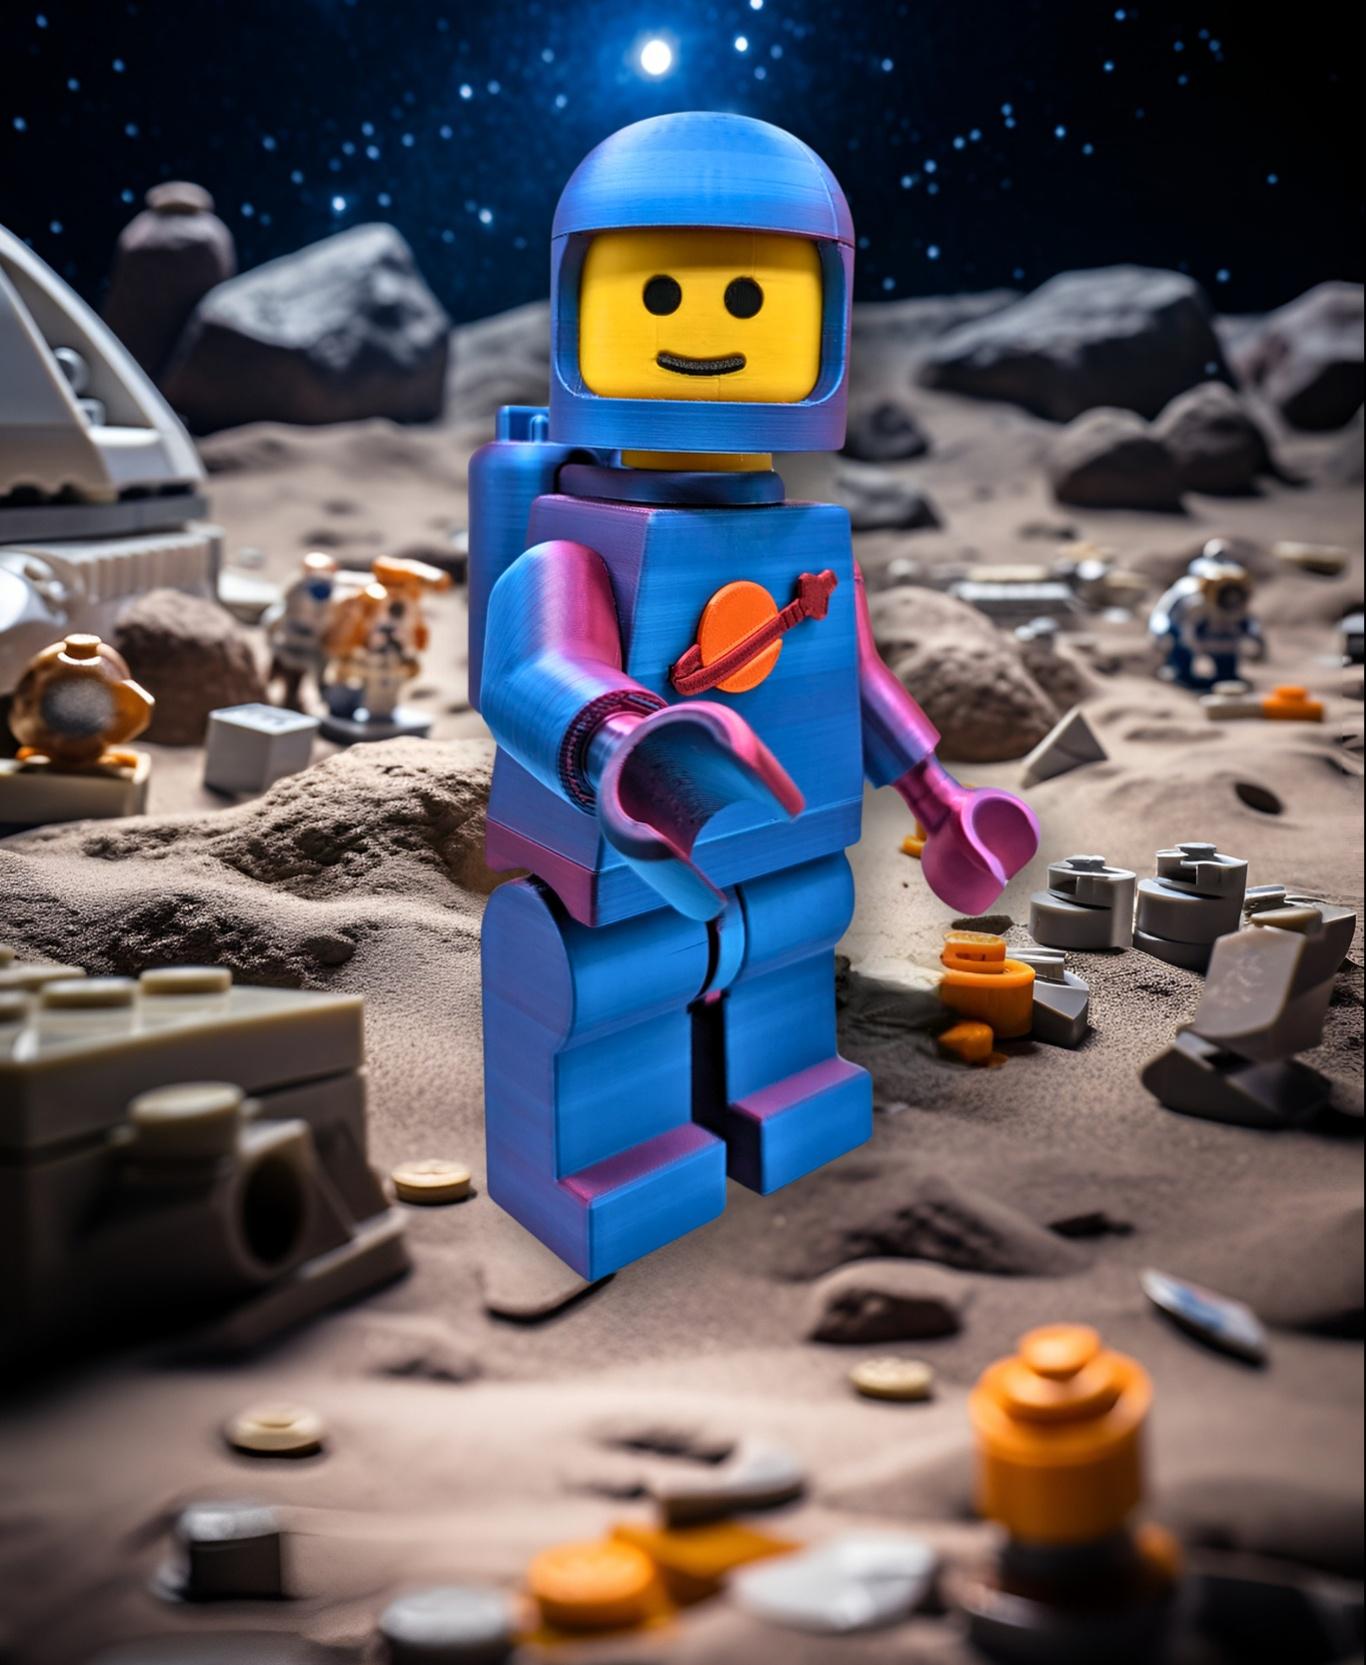 Classic Spaceman (6:1 LEGO-inspired brick figure, NO MMU/AMS, NO supports, NO glue) - Polymaker Dual Silk PLA and Polymaker Savanna Yellow - 3d model